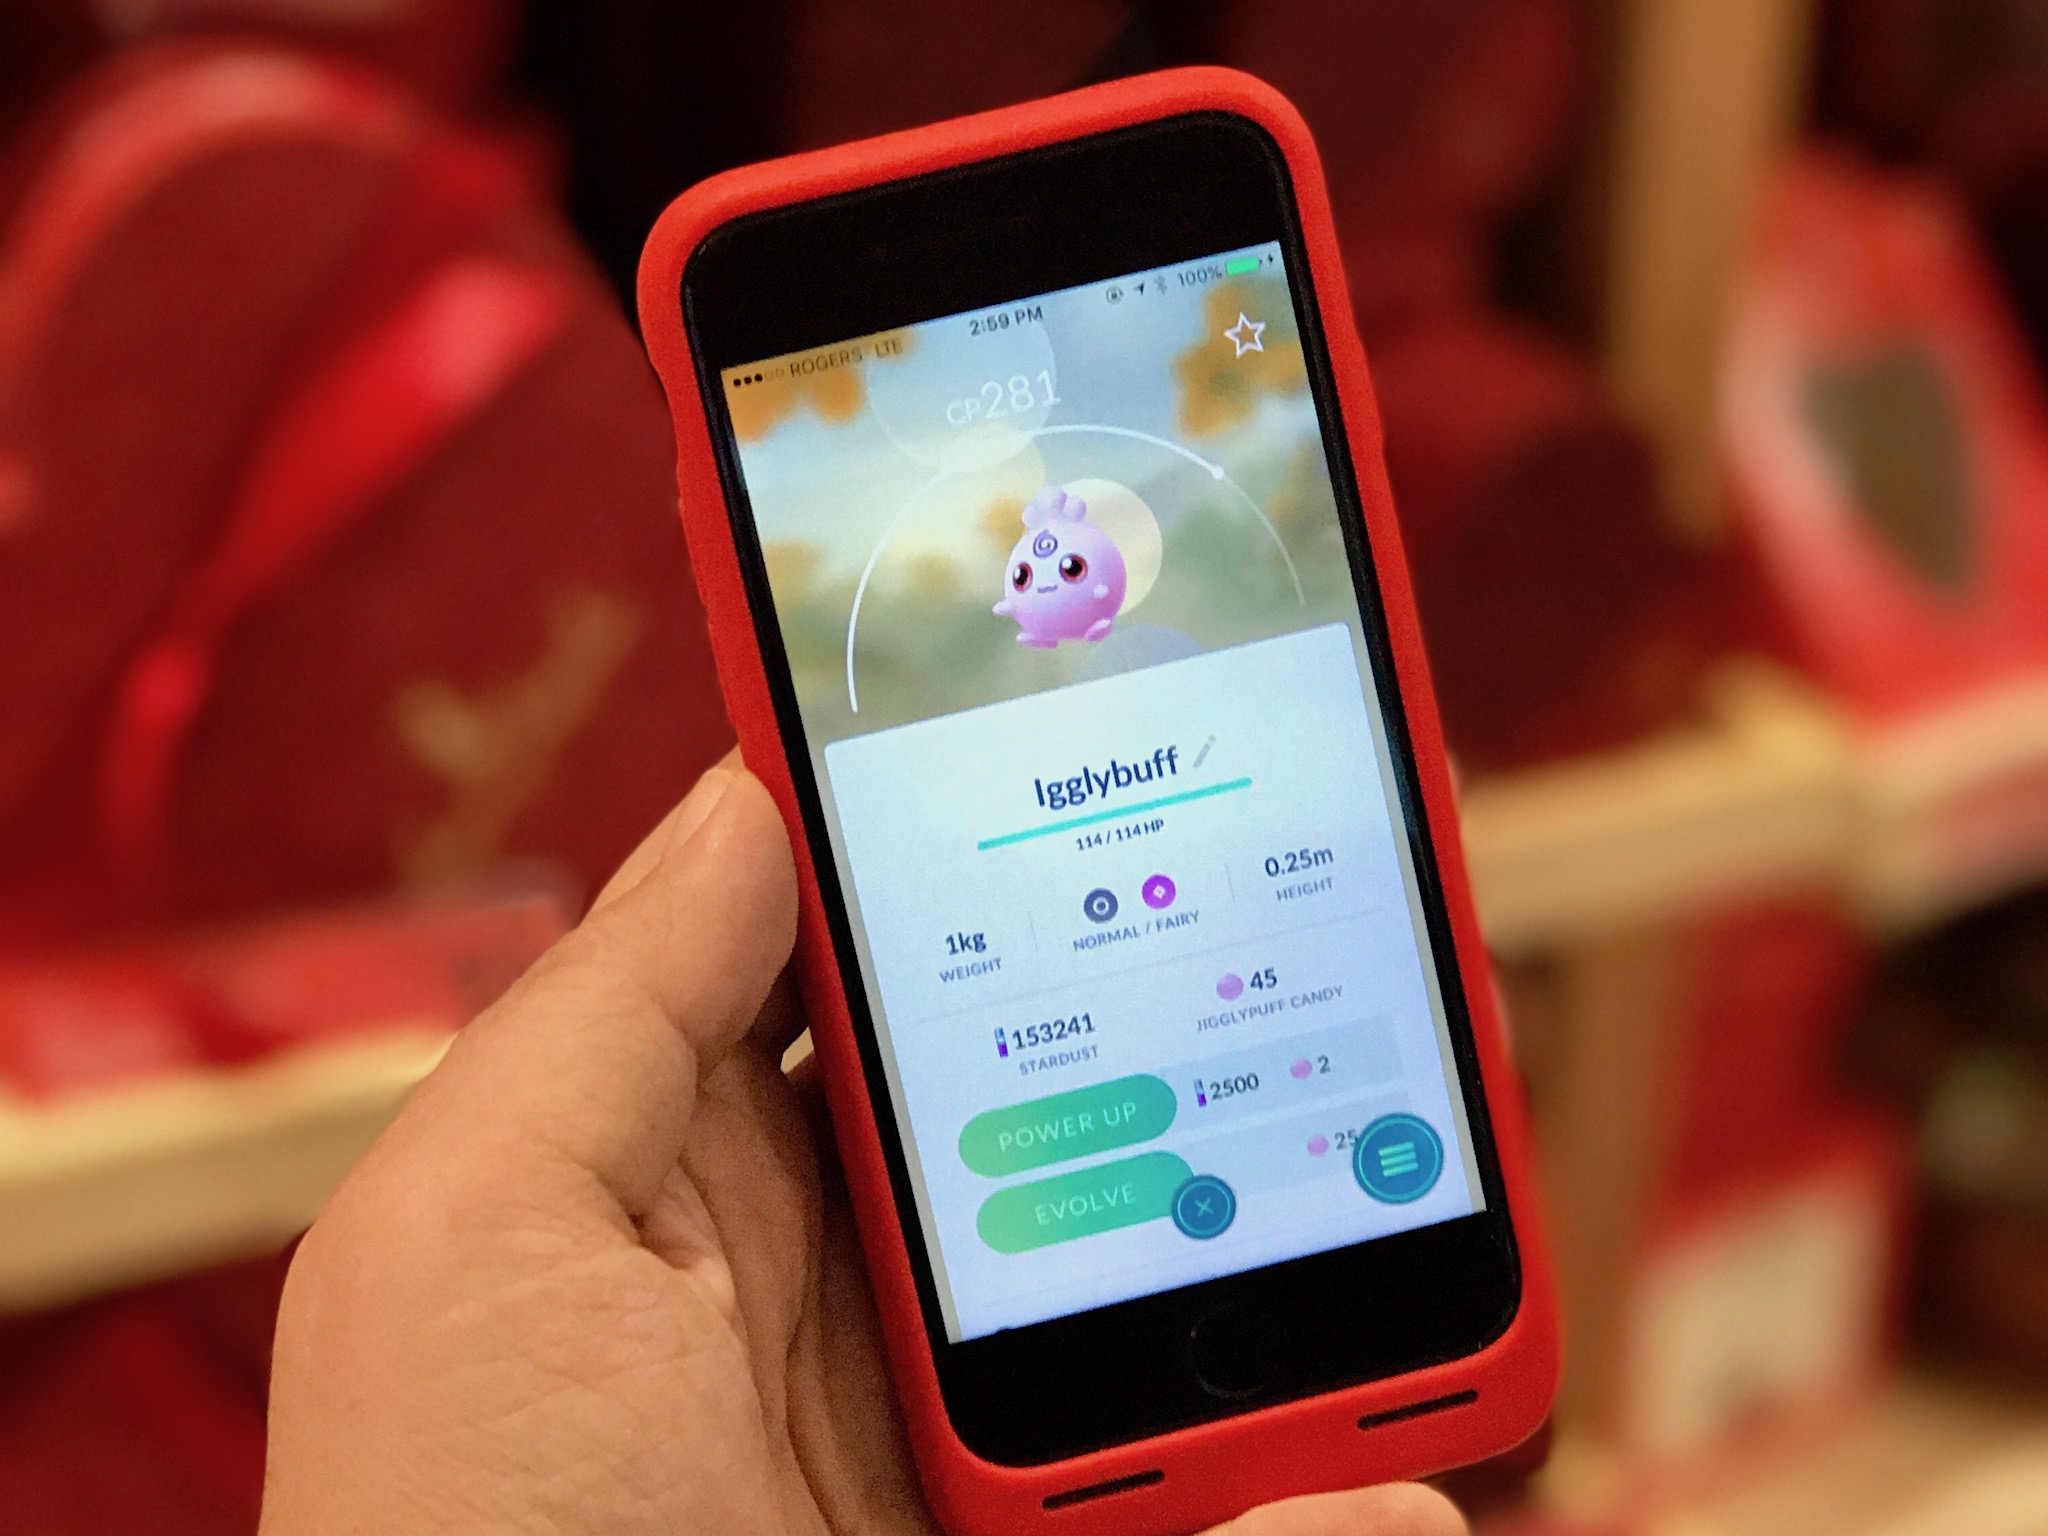 Pokémon Go Valentine's event: What you need to do right now!